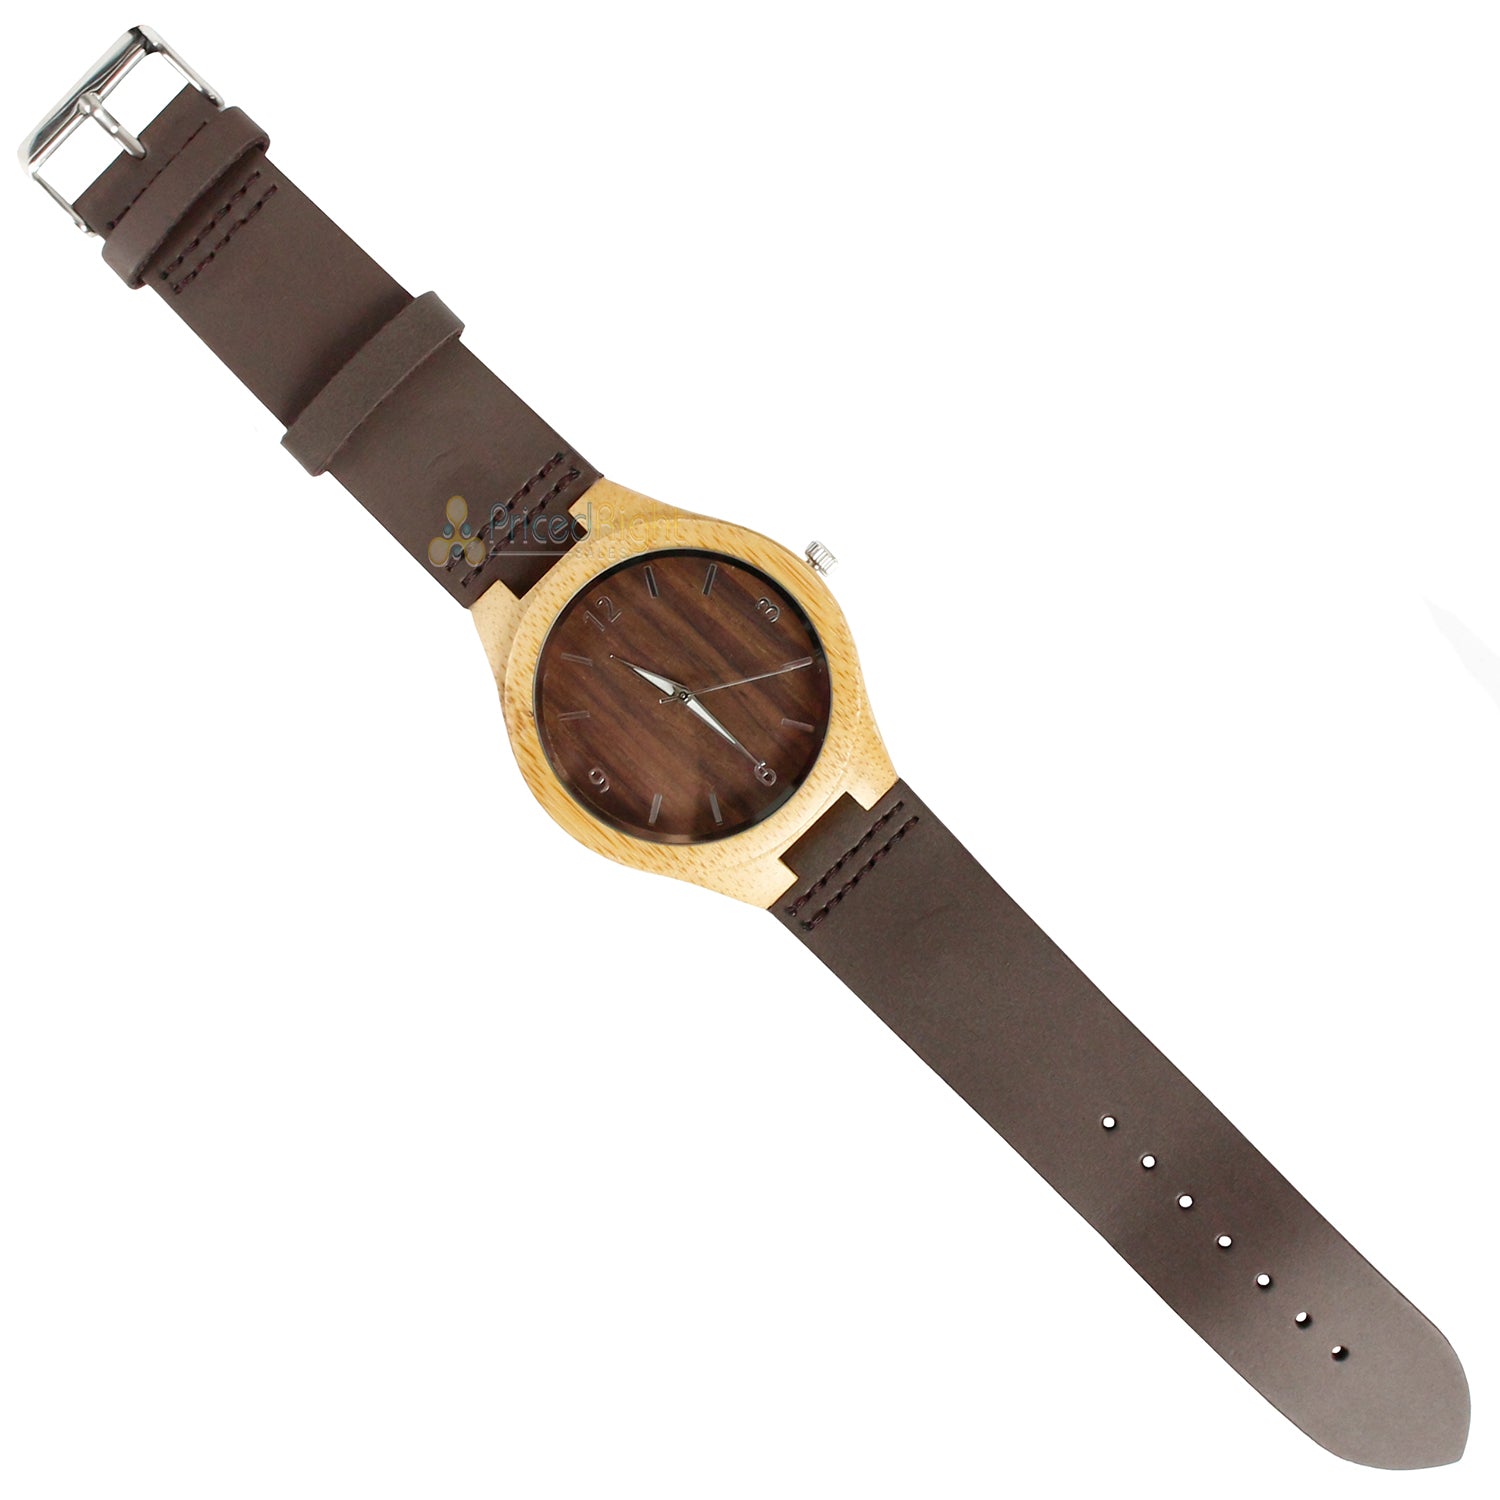 Buy Men's Wood Watch,Creative Colorful Bamboo Quartz Watch for Men  Hand-Made Wooden Mens Watches, Q1088, at Amazon.in